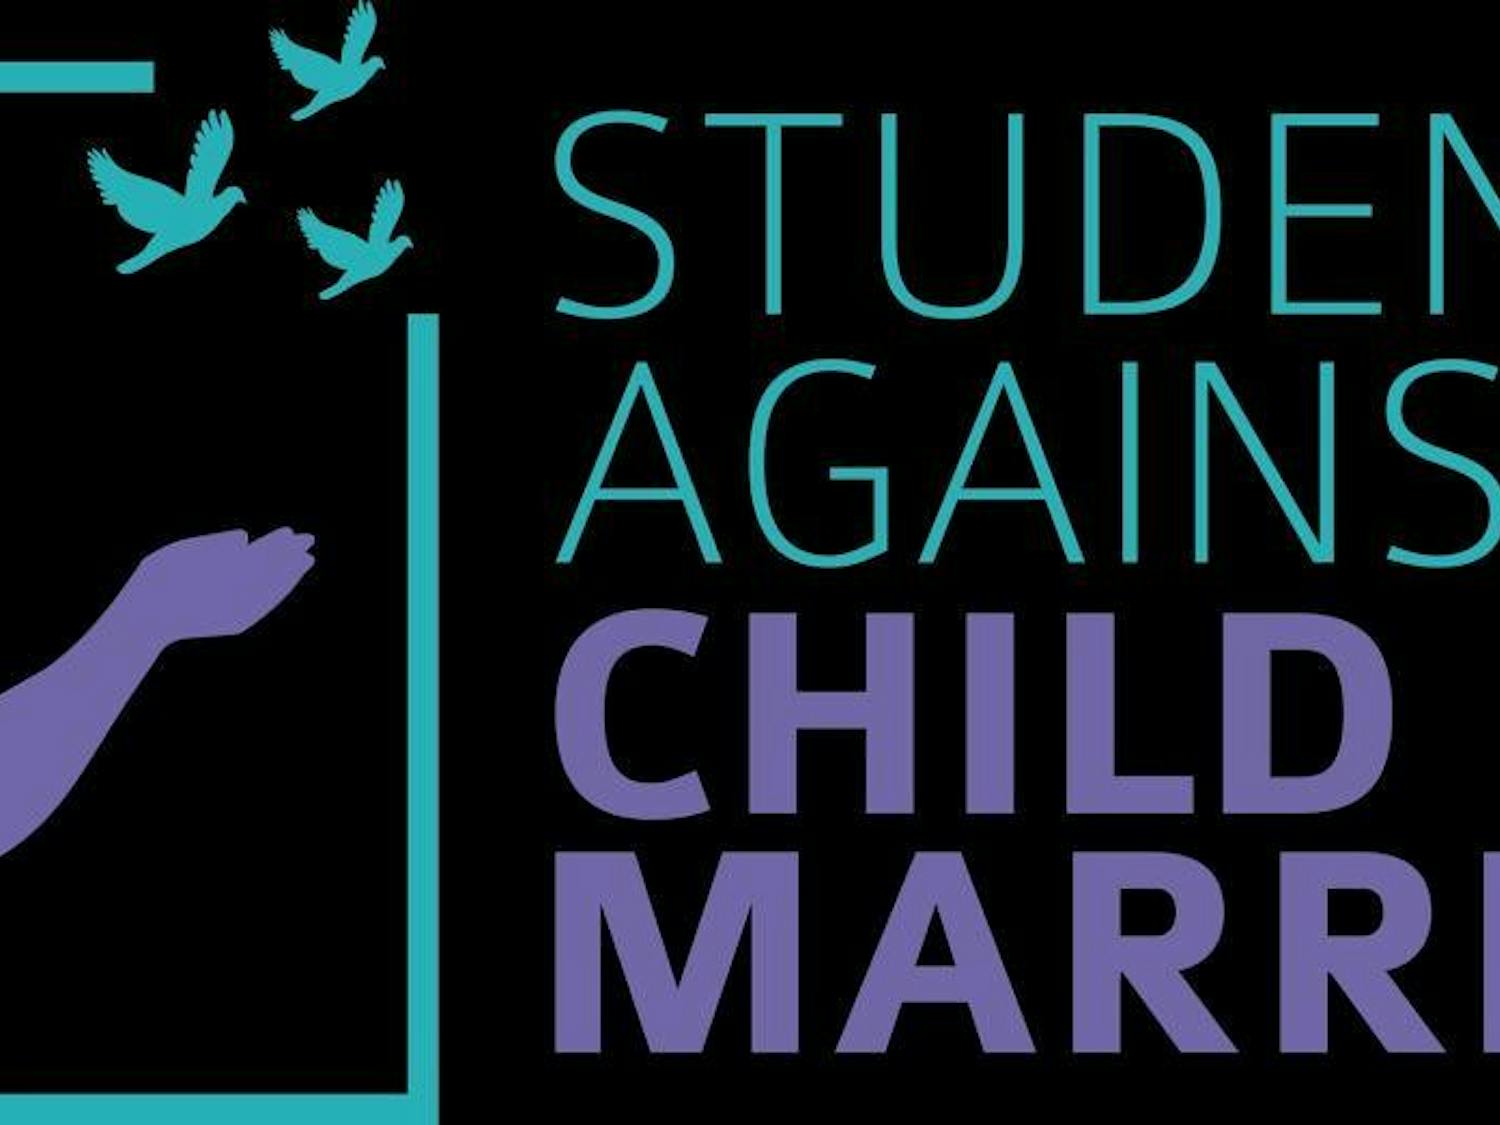 Students Against Child Marriage logo.jpg